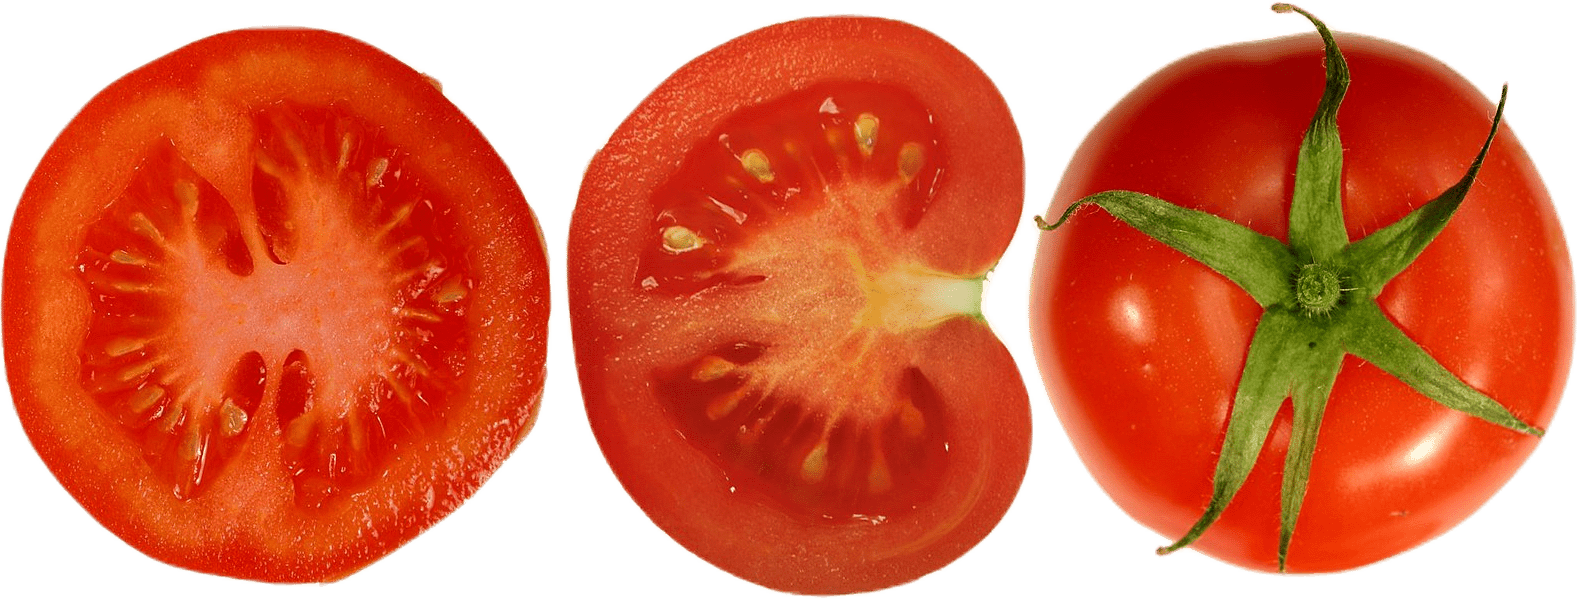 A red tomato, and two halves of other tomatoes, sliced vertically and horizontally to show its cross-sections.